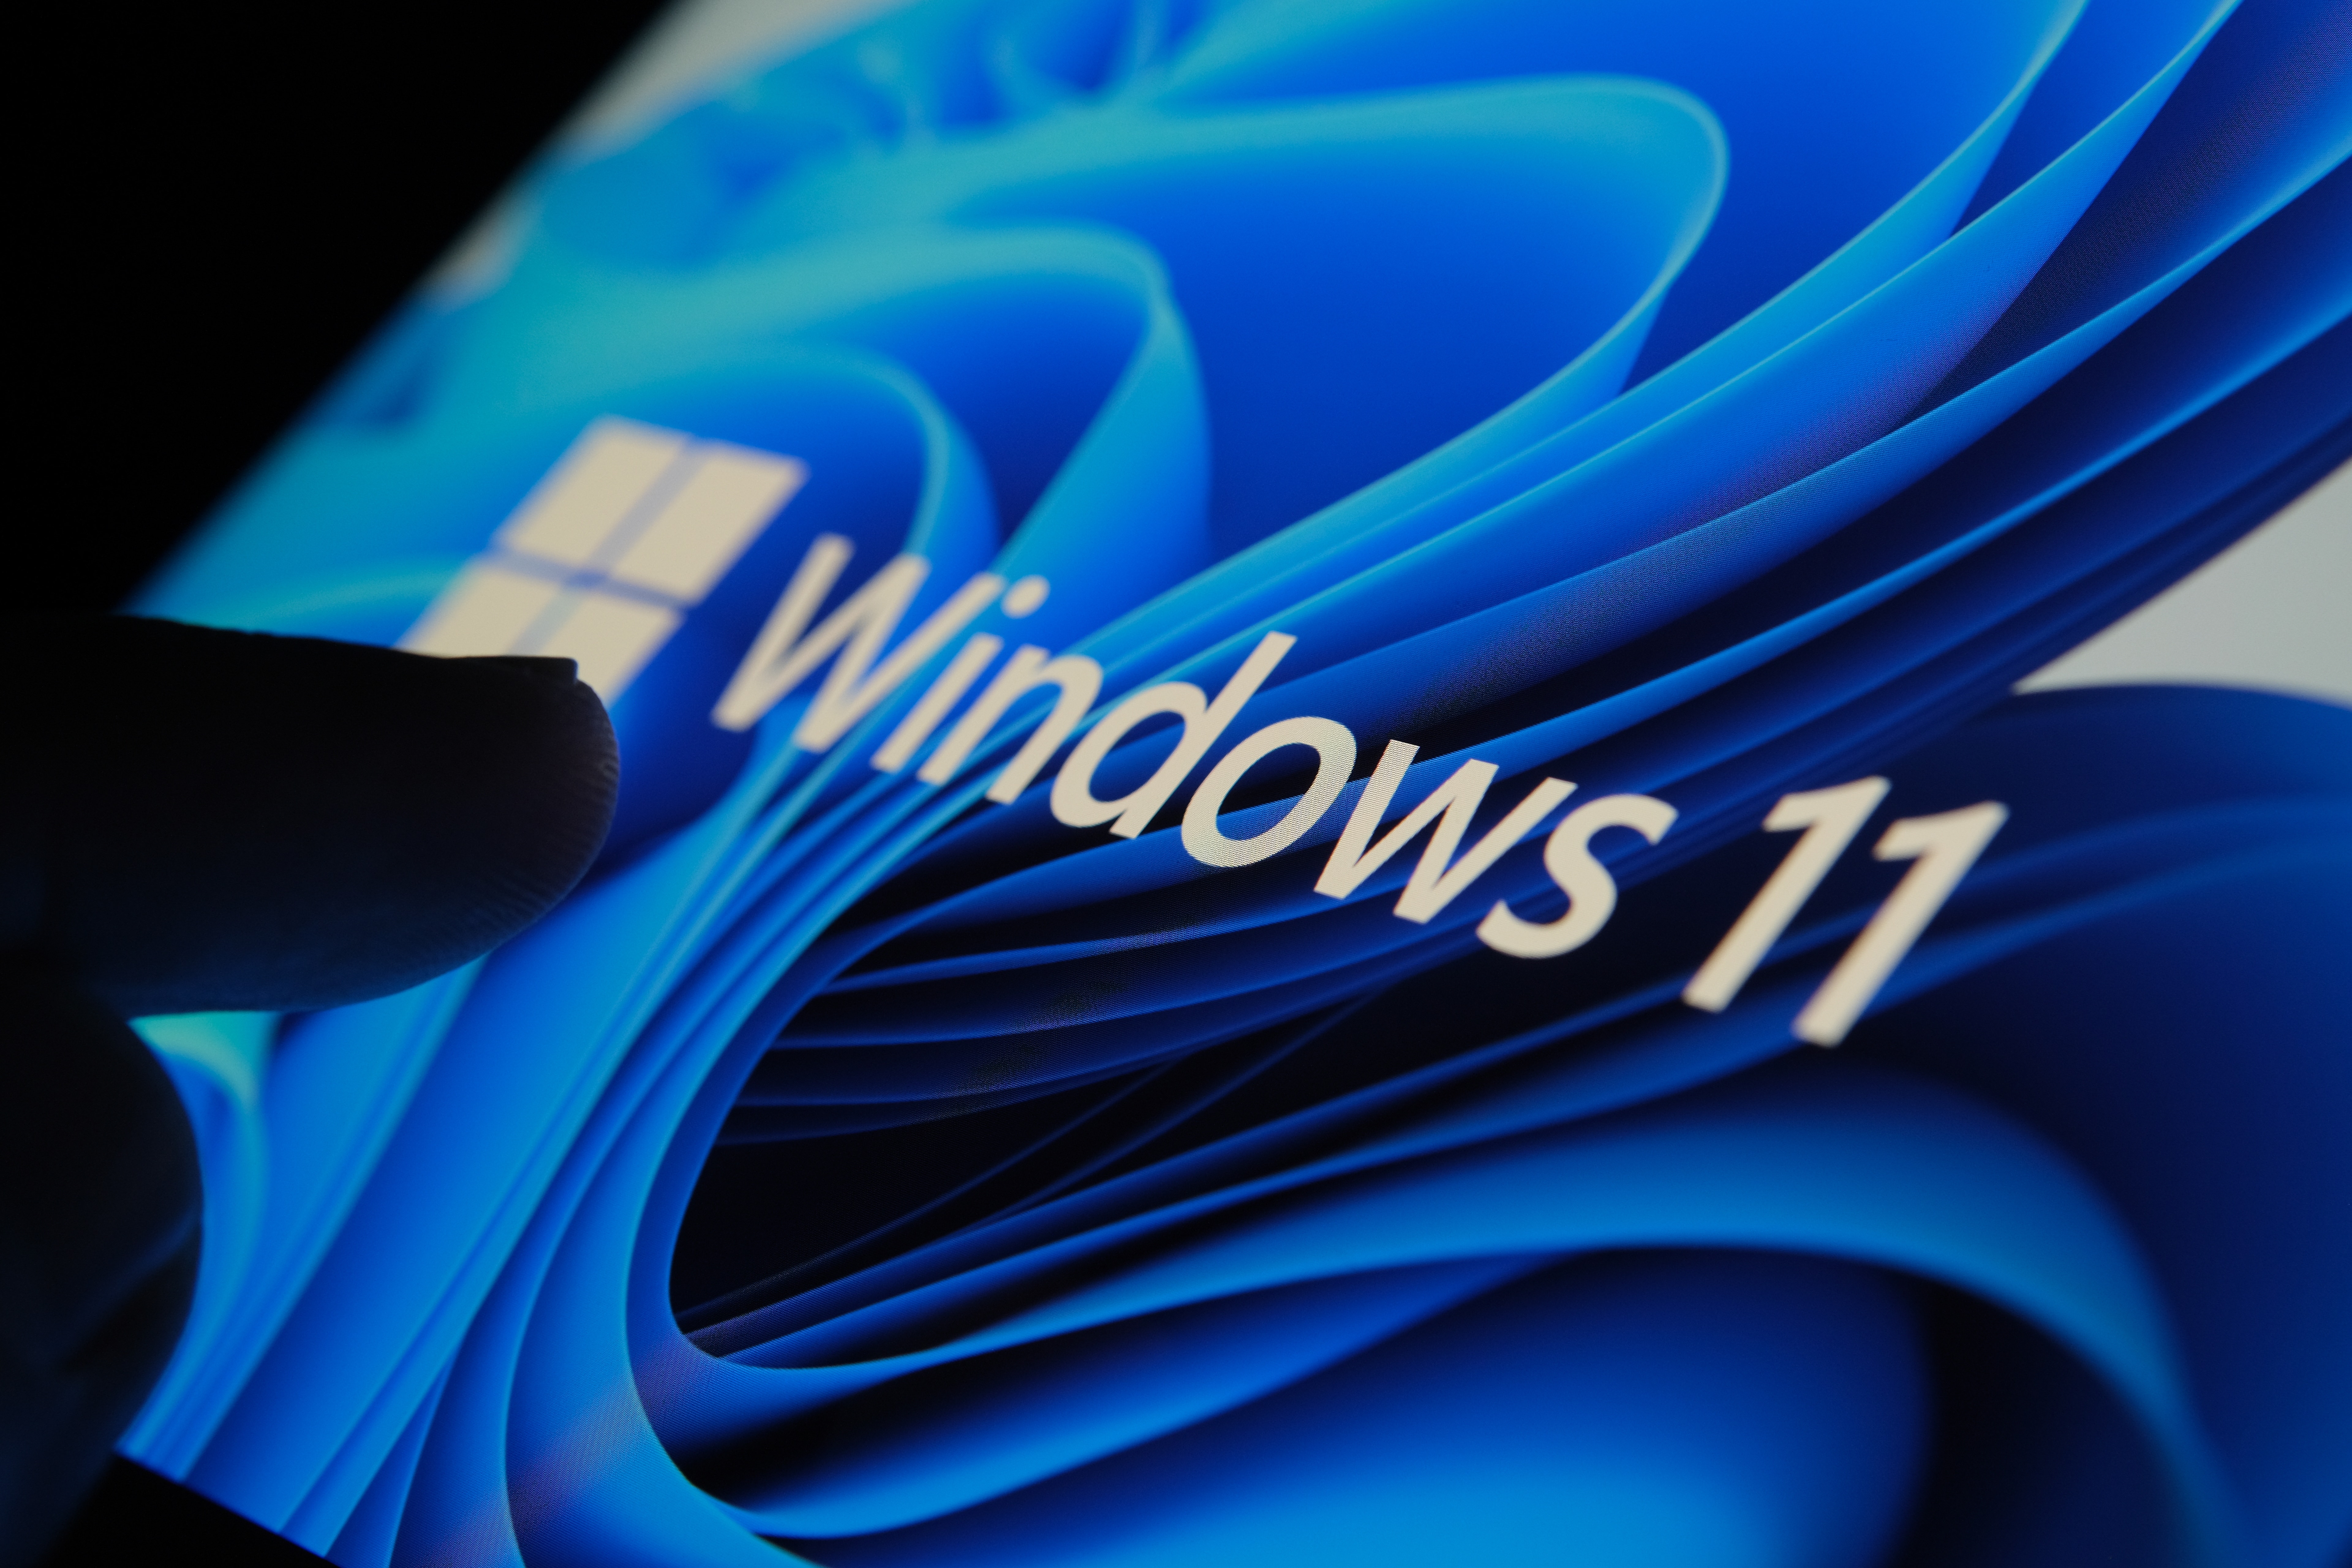 Latest Windows 11 Update Has Bug That Can Slow File Downloading By 40%, Microsoft Still Hunting For Solution